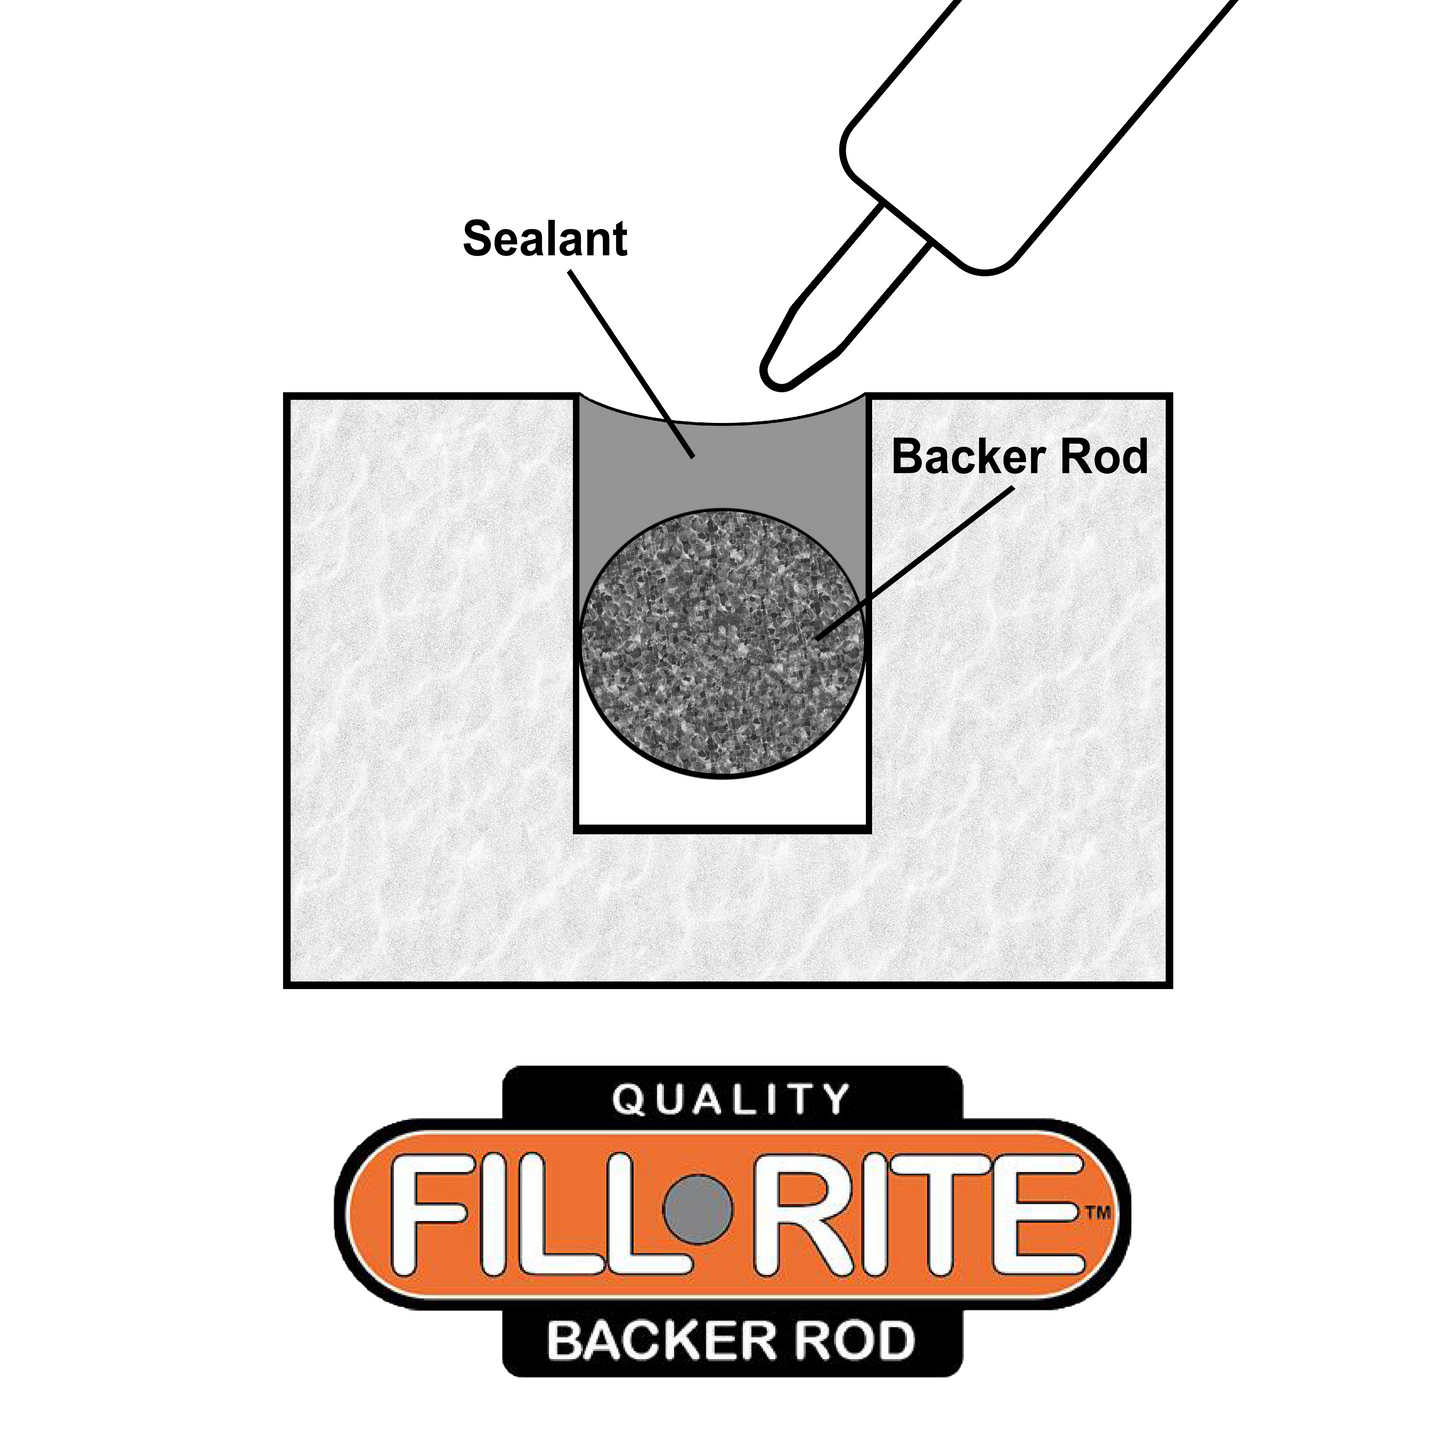 FILL-RITE 1.5-inch Backer Rod Closed-Cell (70 Units of 1.5" x 72") 420 Feet